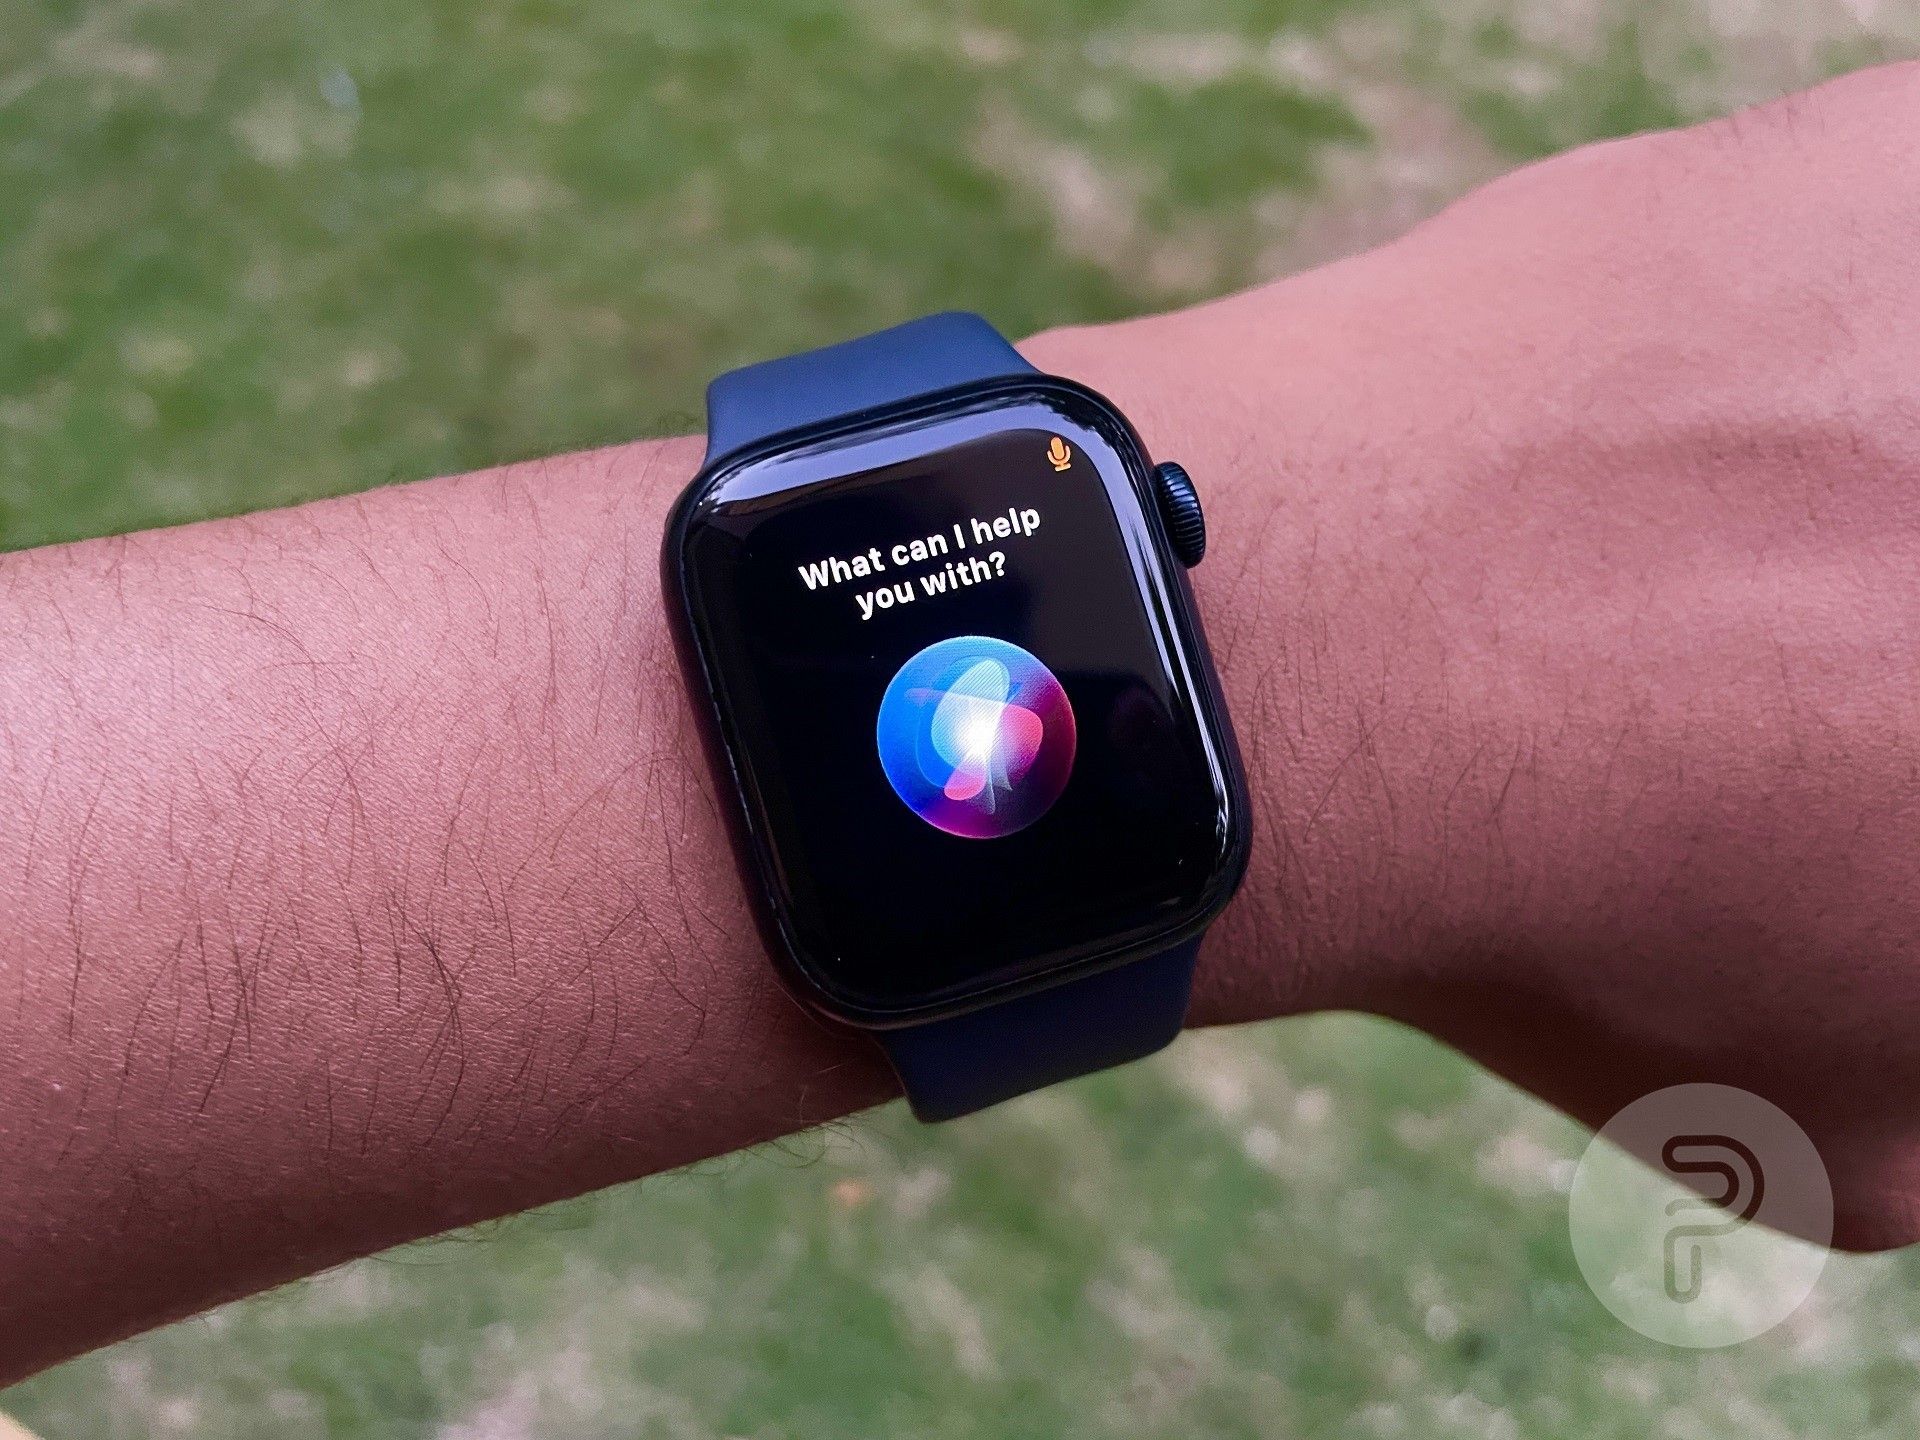 an image showing the Siri interaction screen on Apple Watch